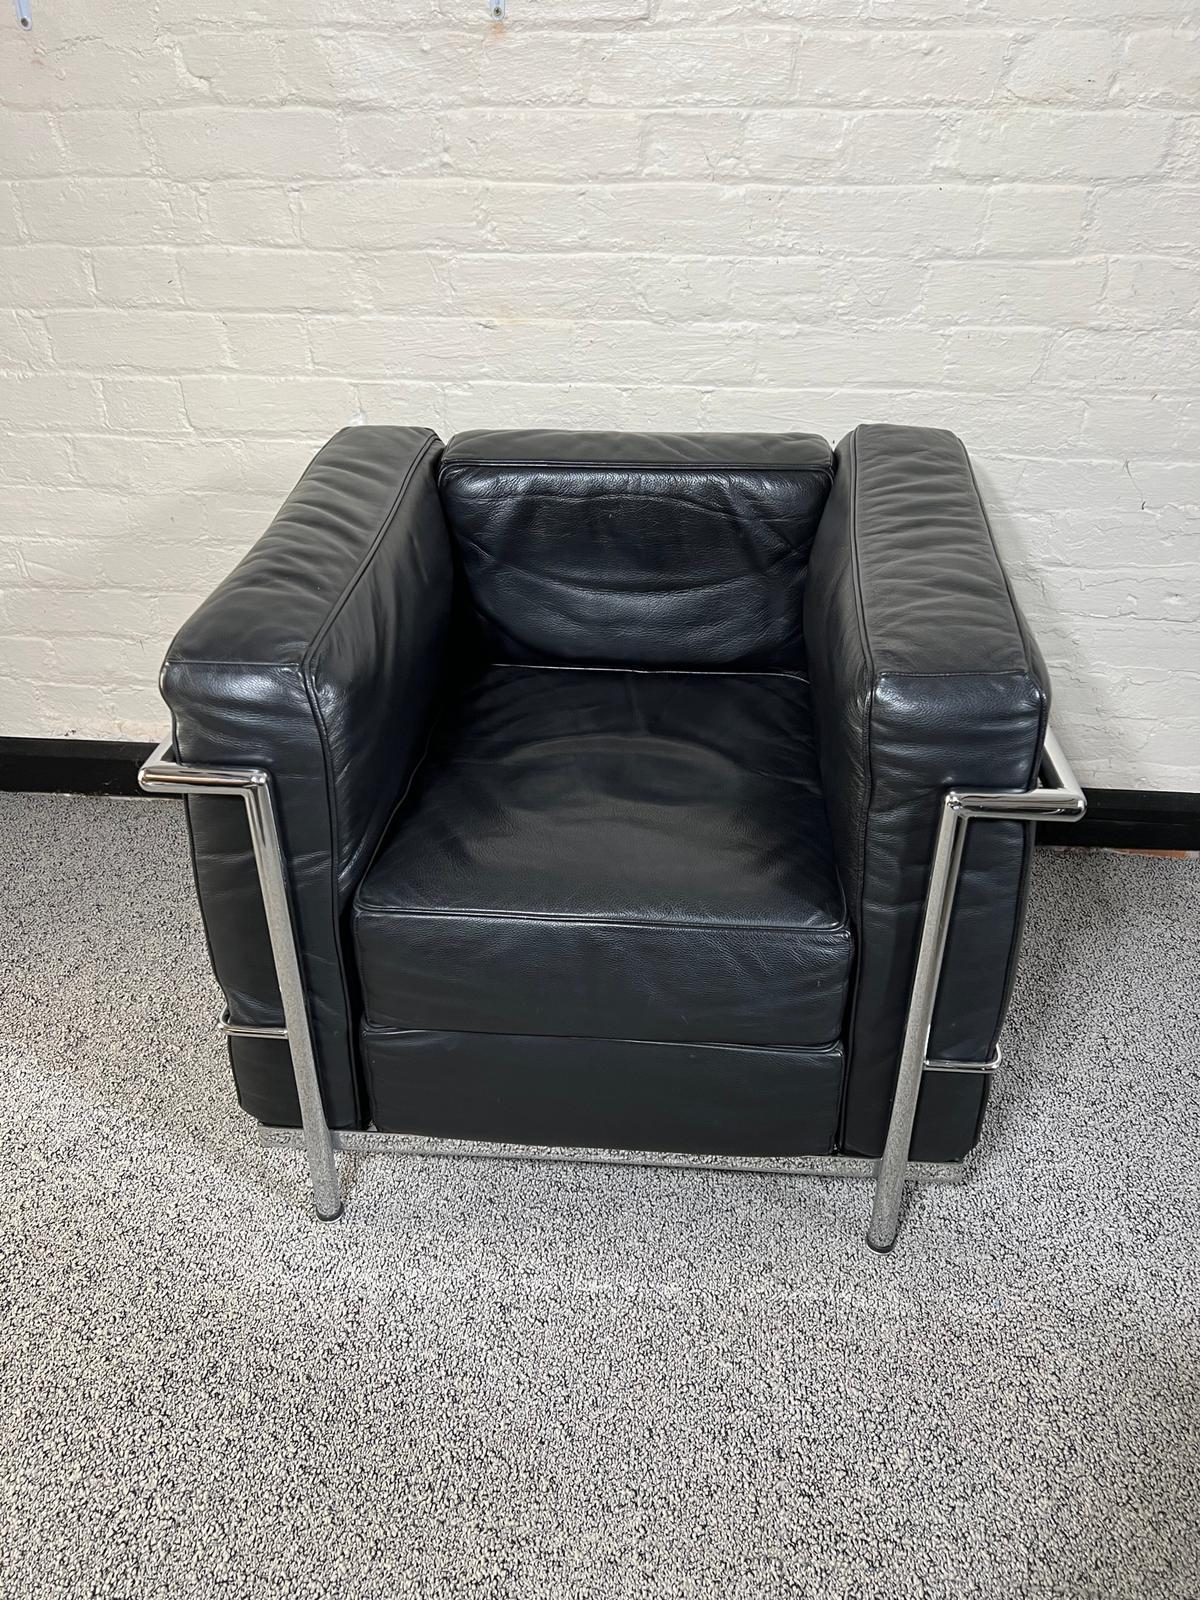 LC2 Club Chairs by Le Corbusier, Jeanneret & Perriand, Soft Black Leather In Good Condition For Sale In Bishop's Stortford, GB